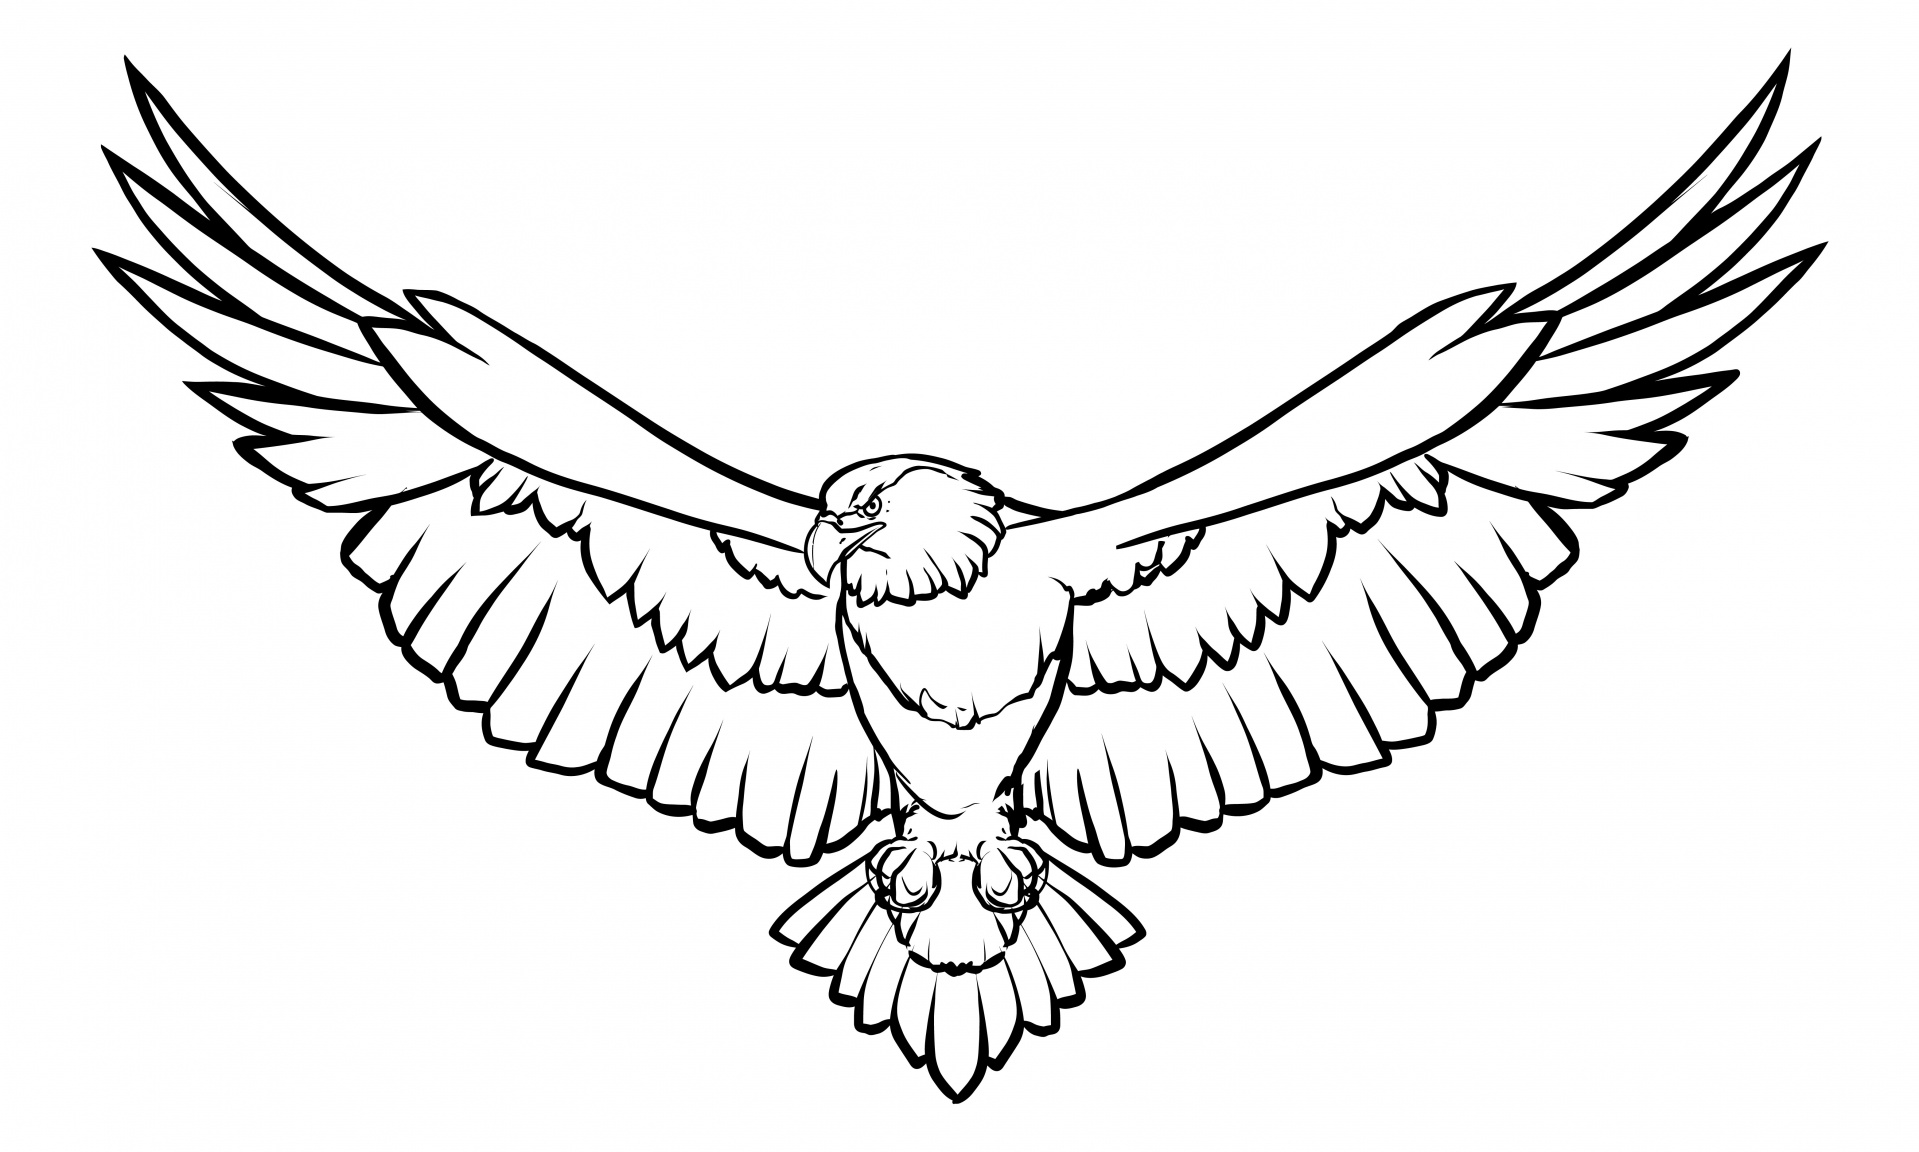 Line art illustration of an eagle with wings spread bird in black and white coloring page on white background